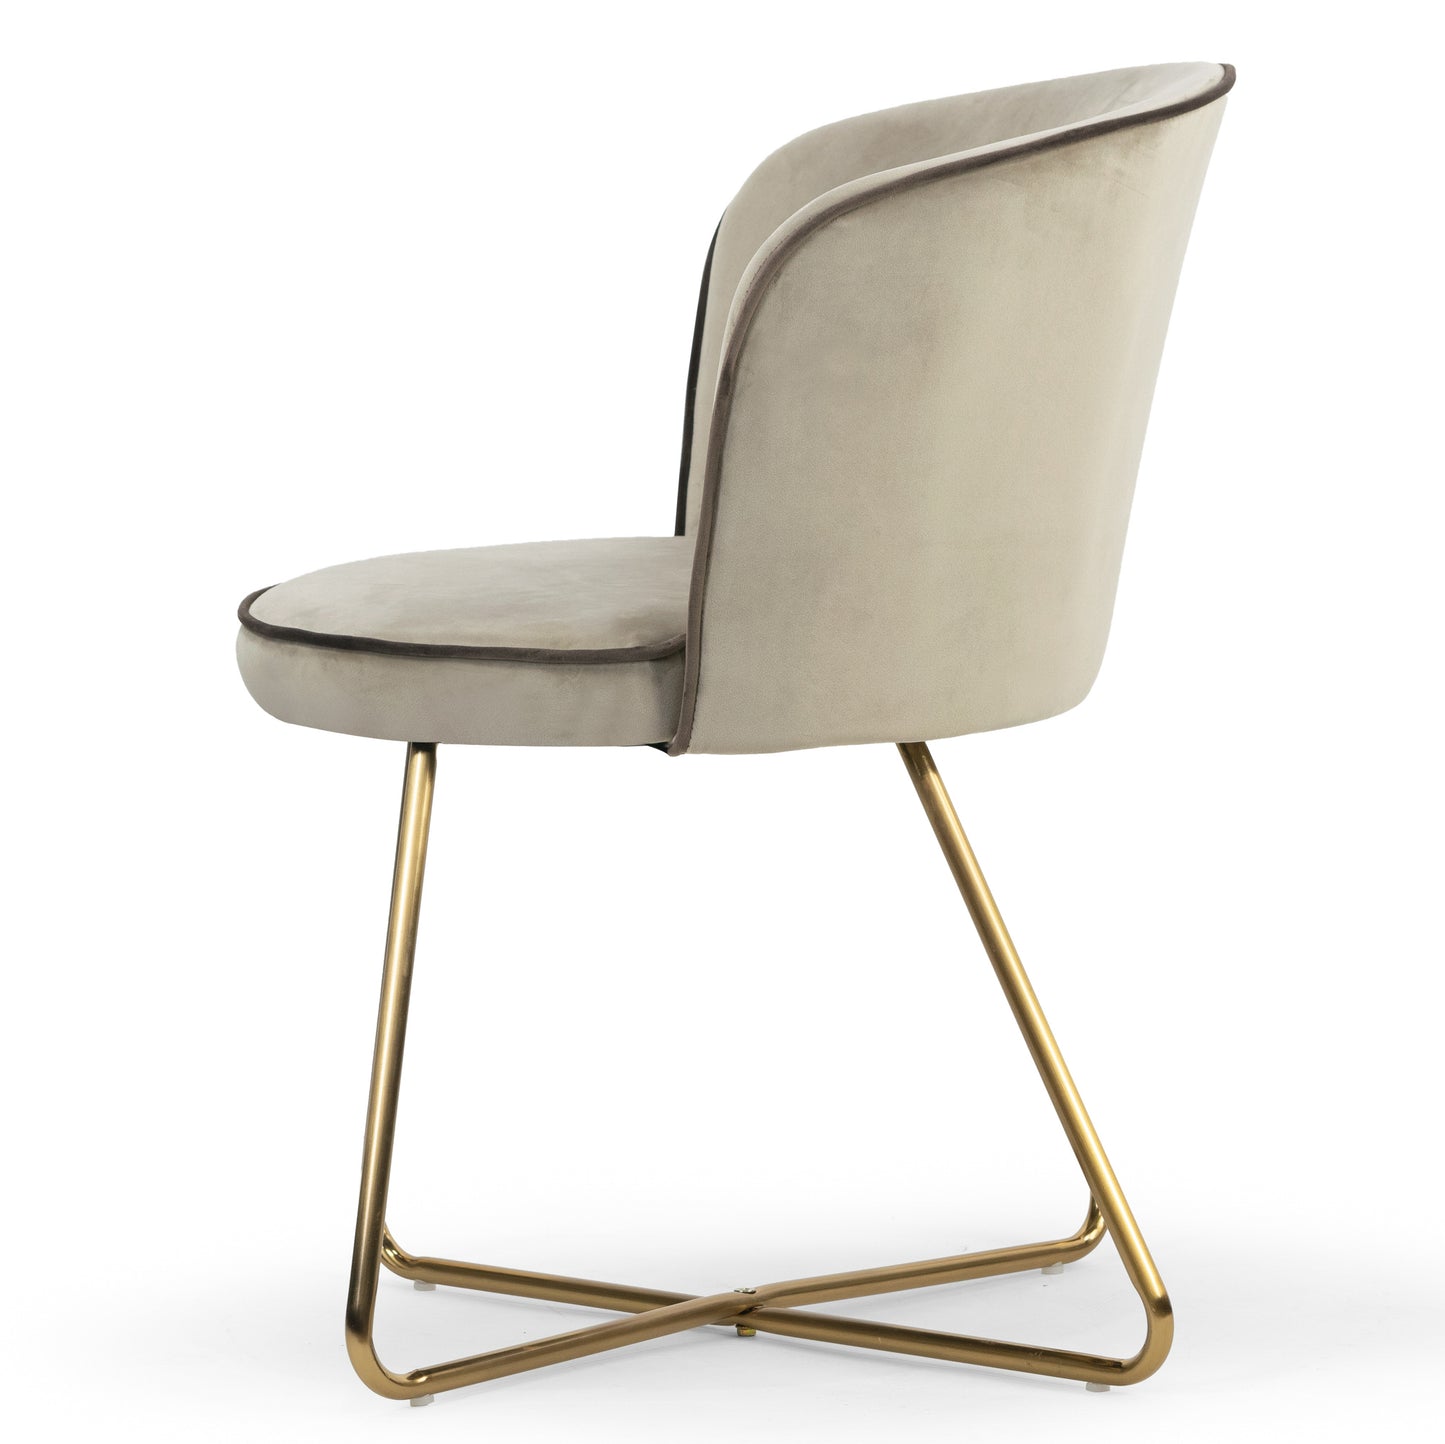 Set of 2 Anila Beige Velvet Dining Chair with Contrasting Piping and Golden Metal Legs